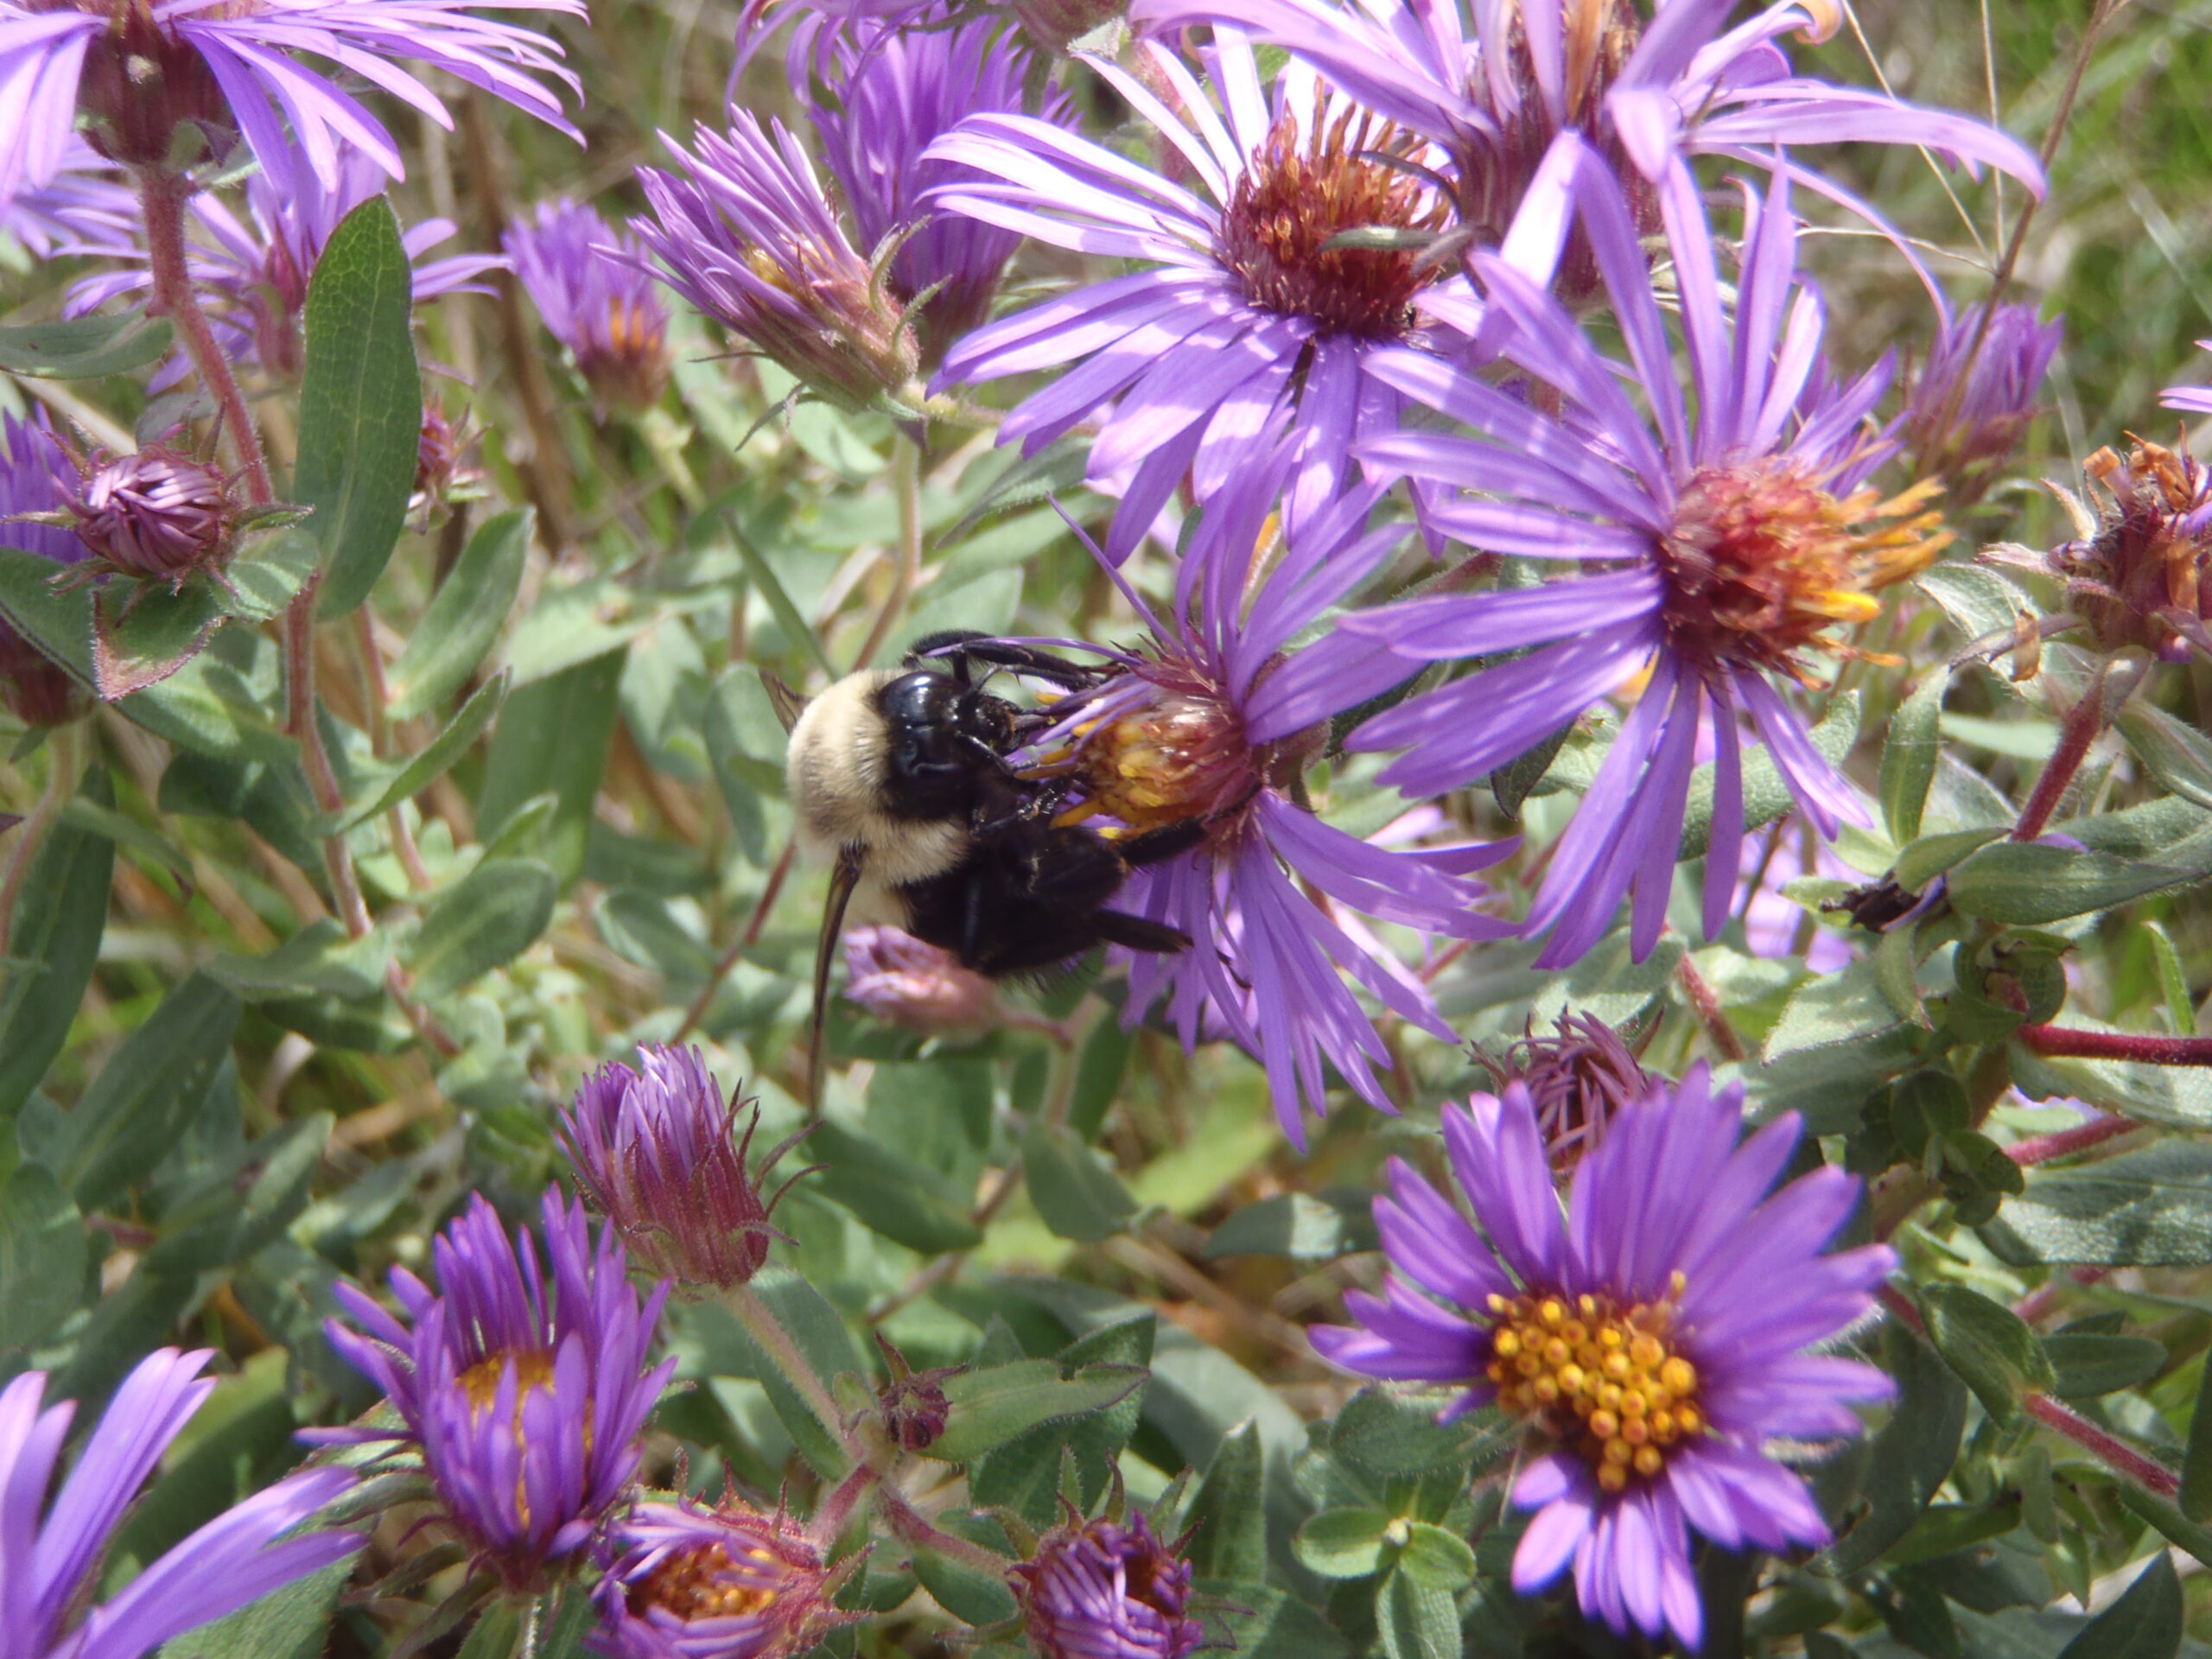 Photo: Bumblebee on New England Aster, by Tom Woodcock